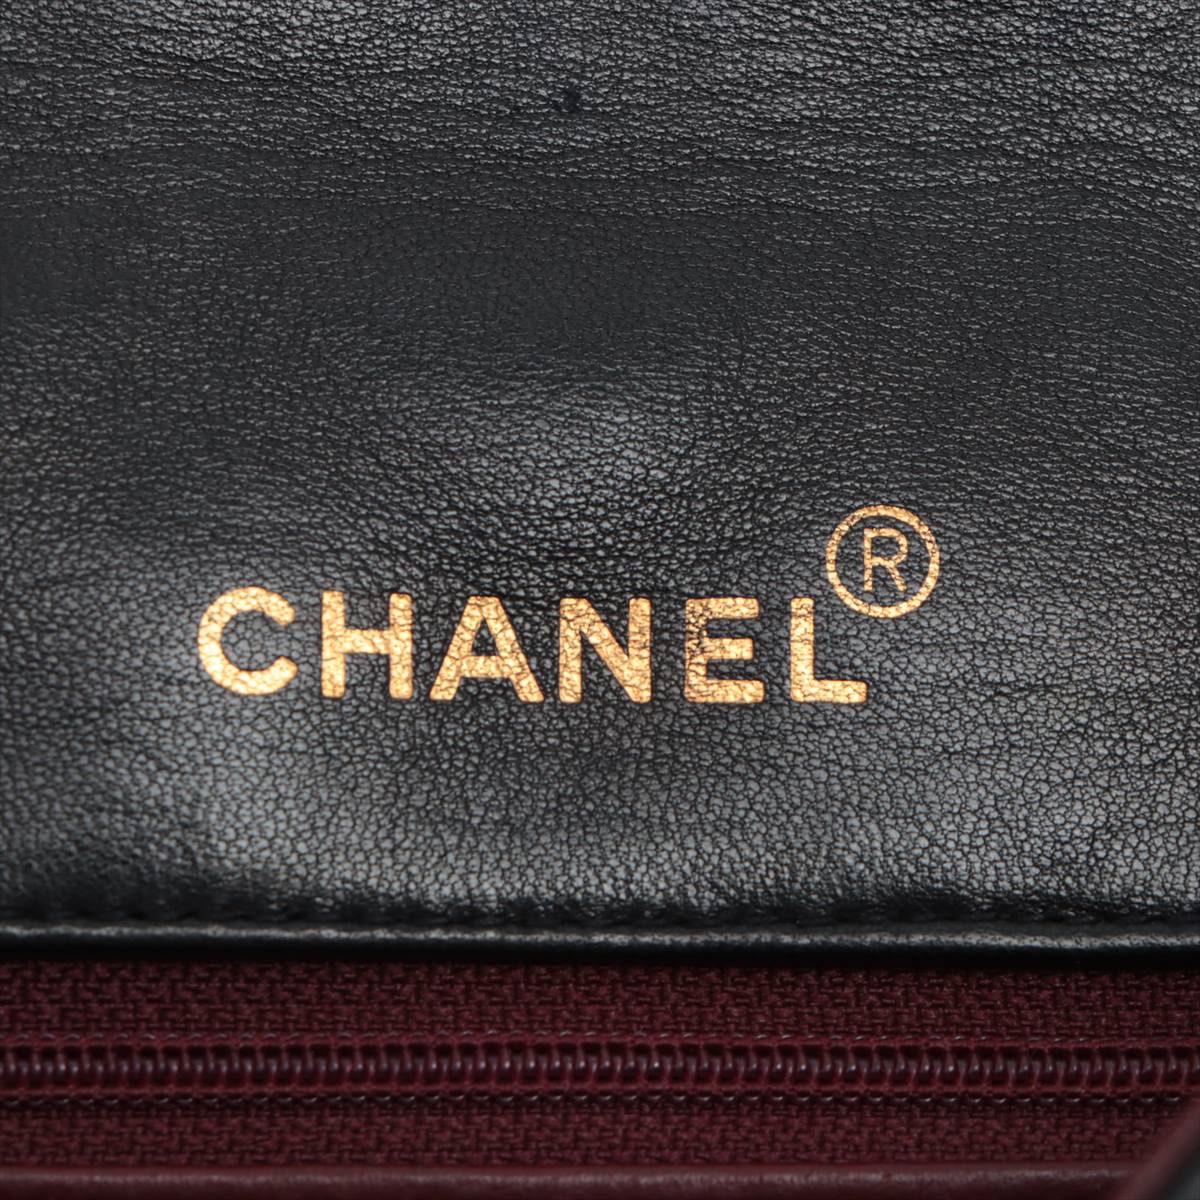 10 Steps You Can Take to Authenticate Any Chanel Bag  Baghunter